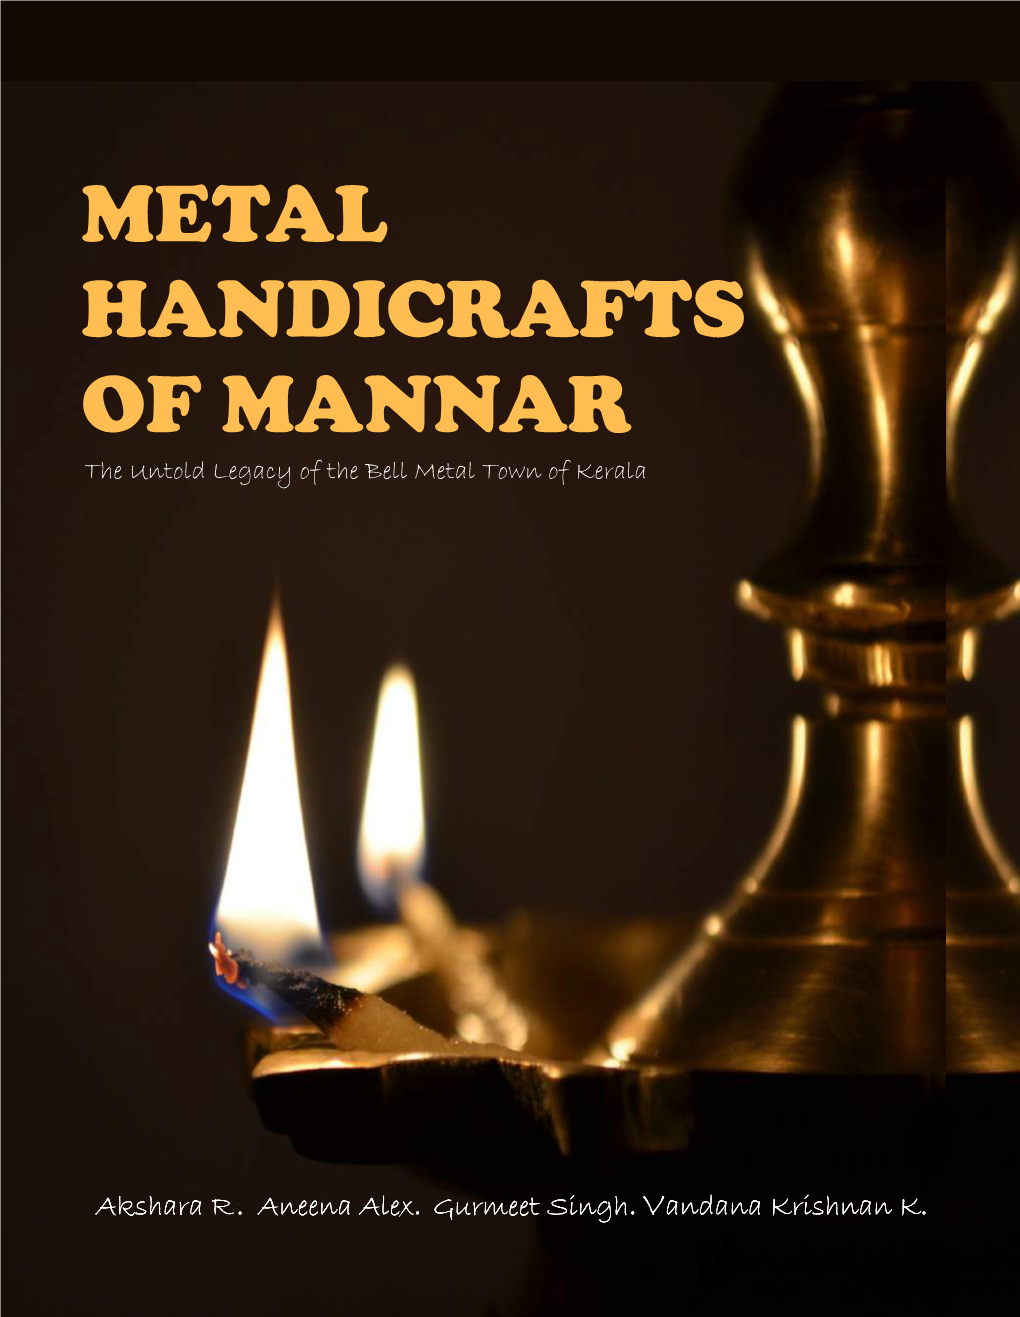 Metal Handicrafts of Mannar-The Untold Legacy of the Bell Metal